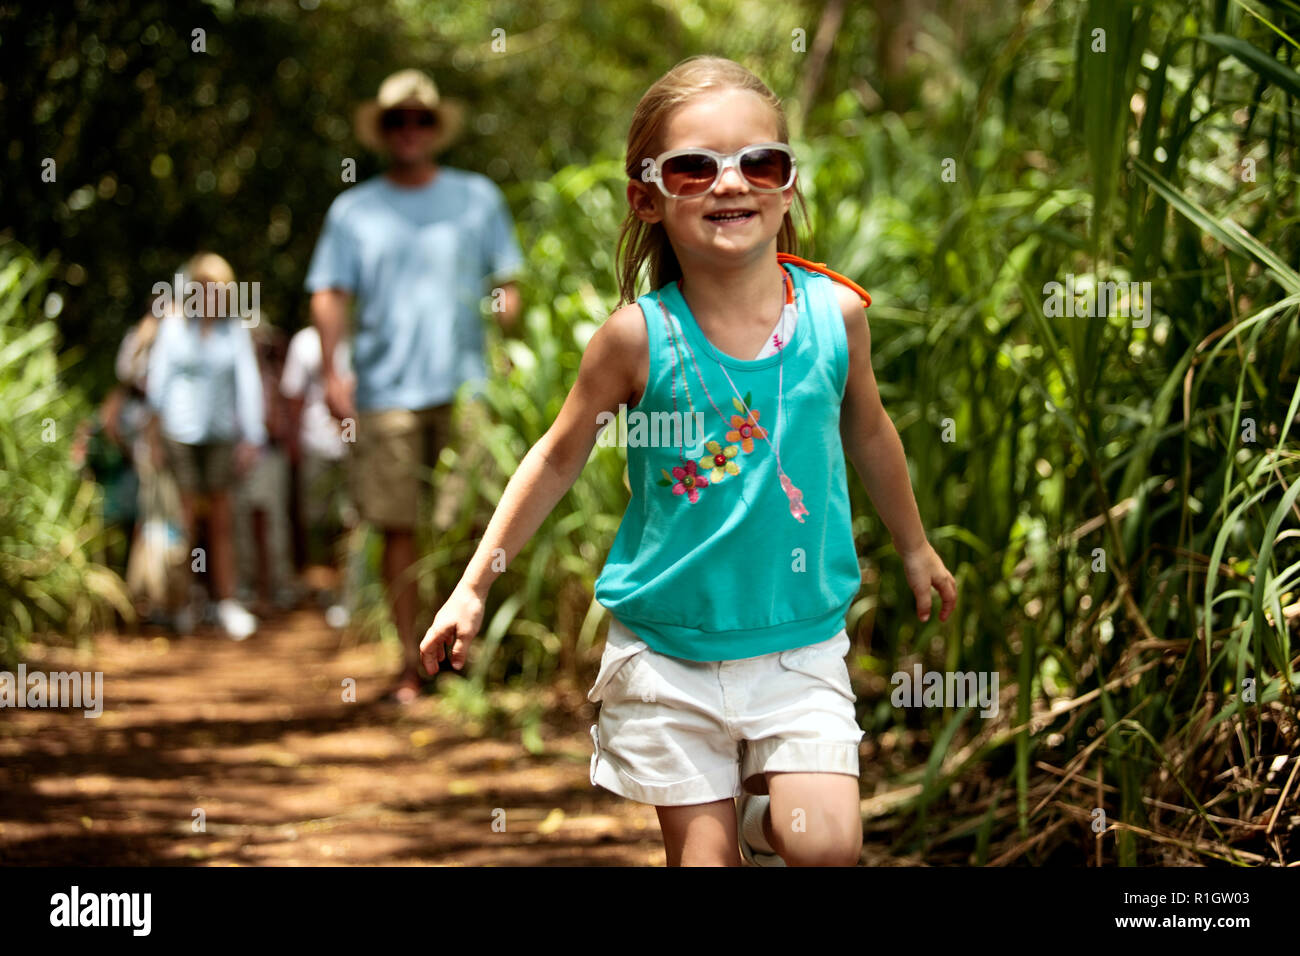 Little girl with her family in the background, hiking through cultivated vegetation in a tropical climate. Stock Photo